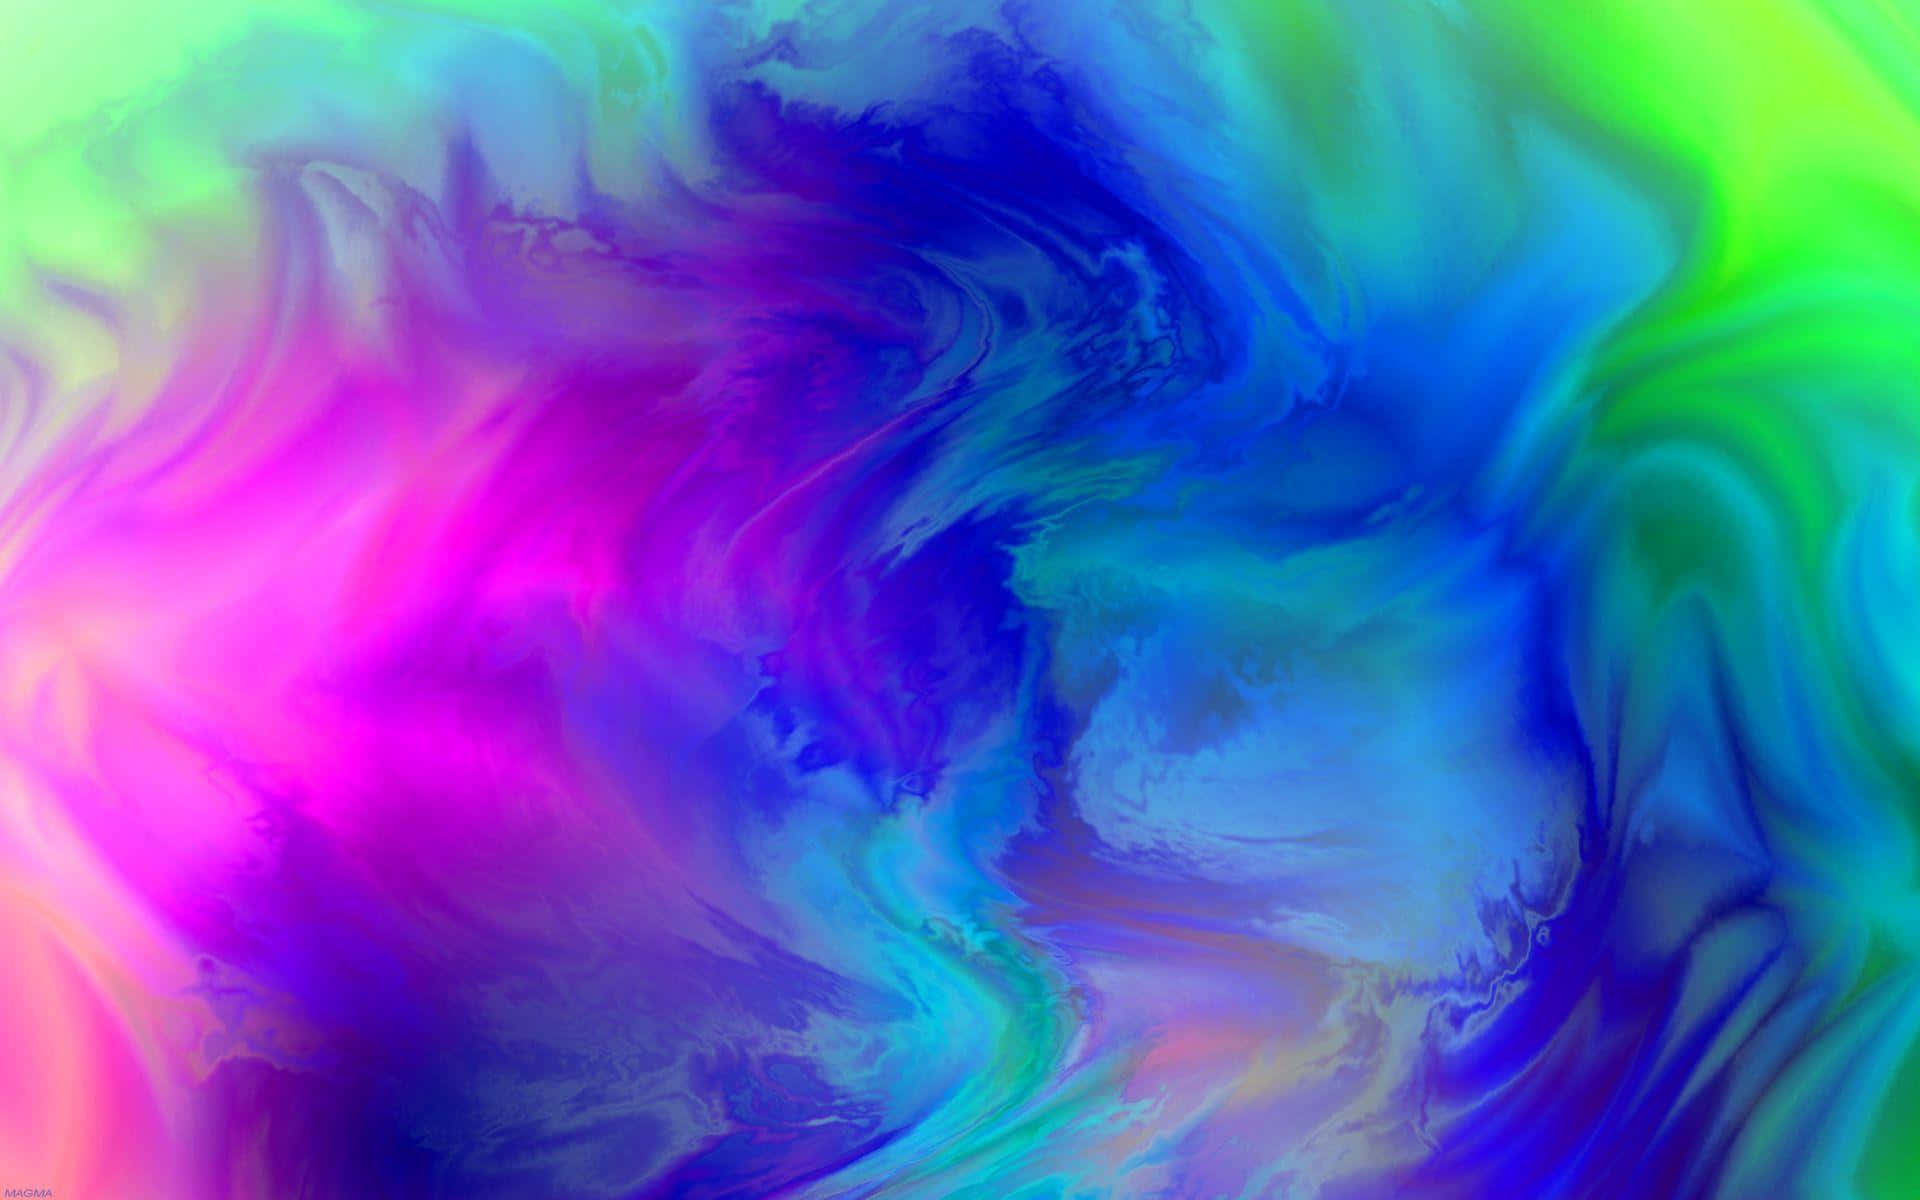 Enjoy a Pop of Color with this Colorful Desktop Wallpaper